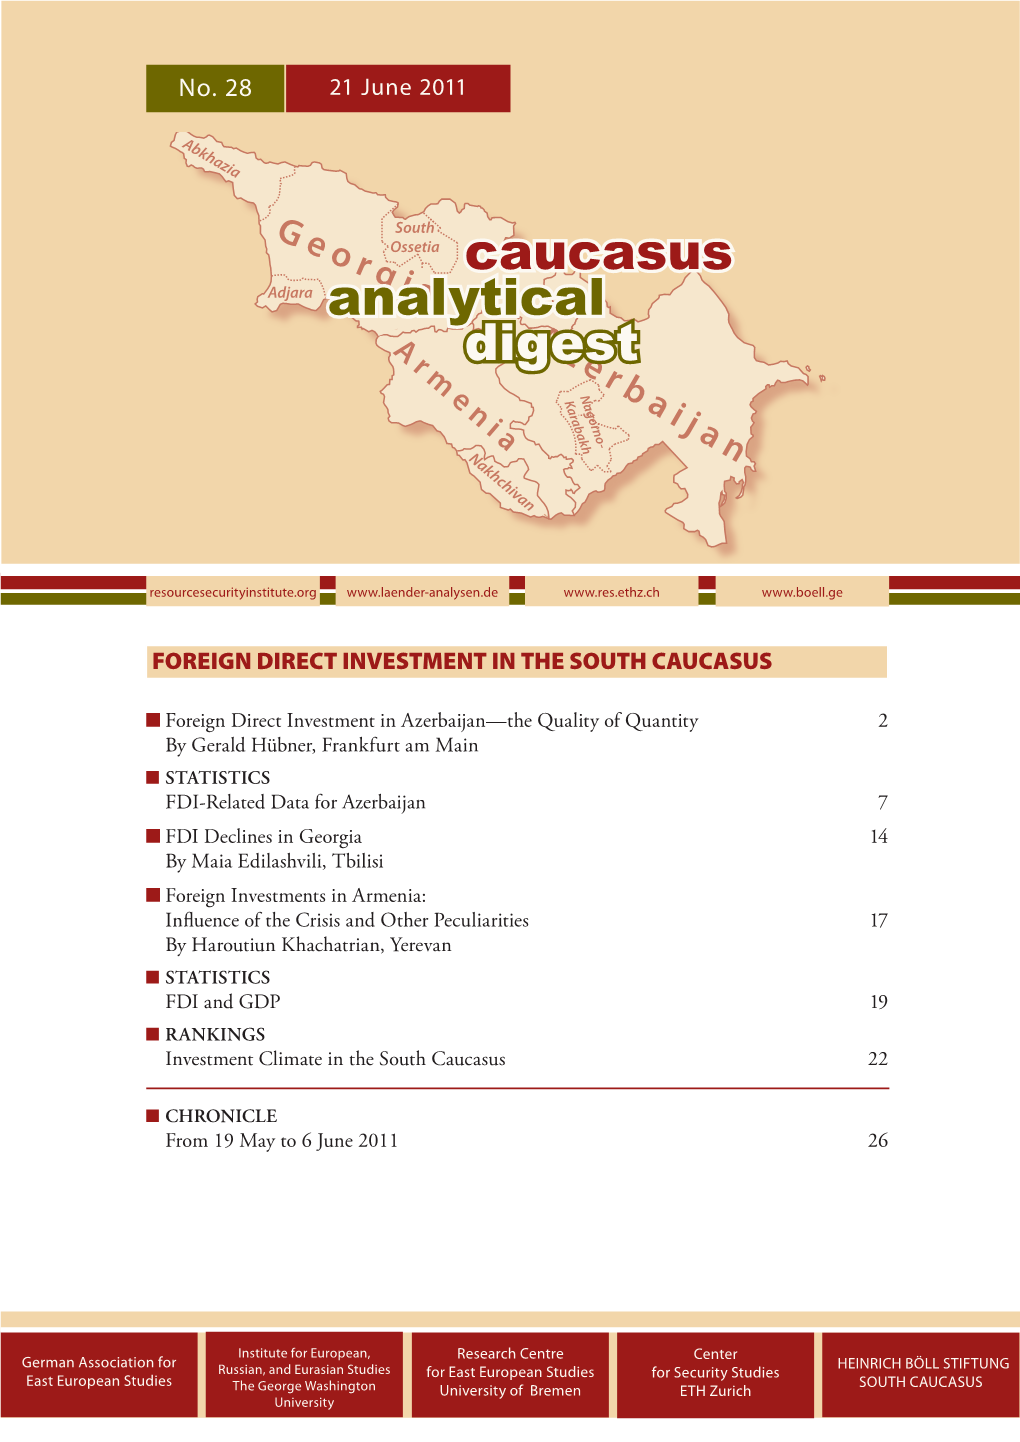 No. 28: Foreign Direct Investment in the South Caucasus